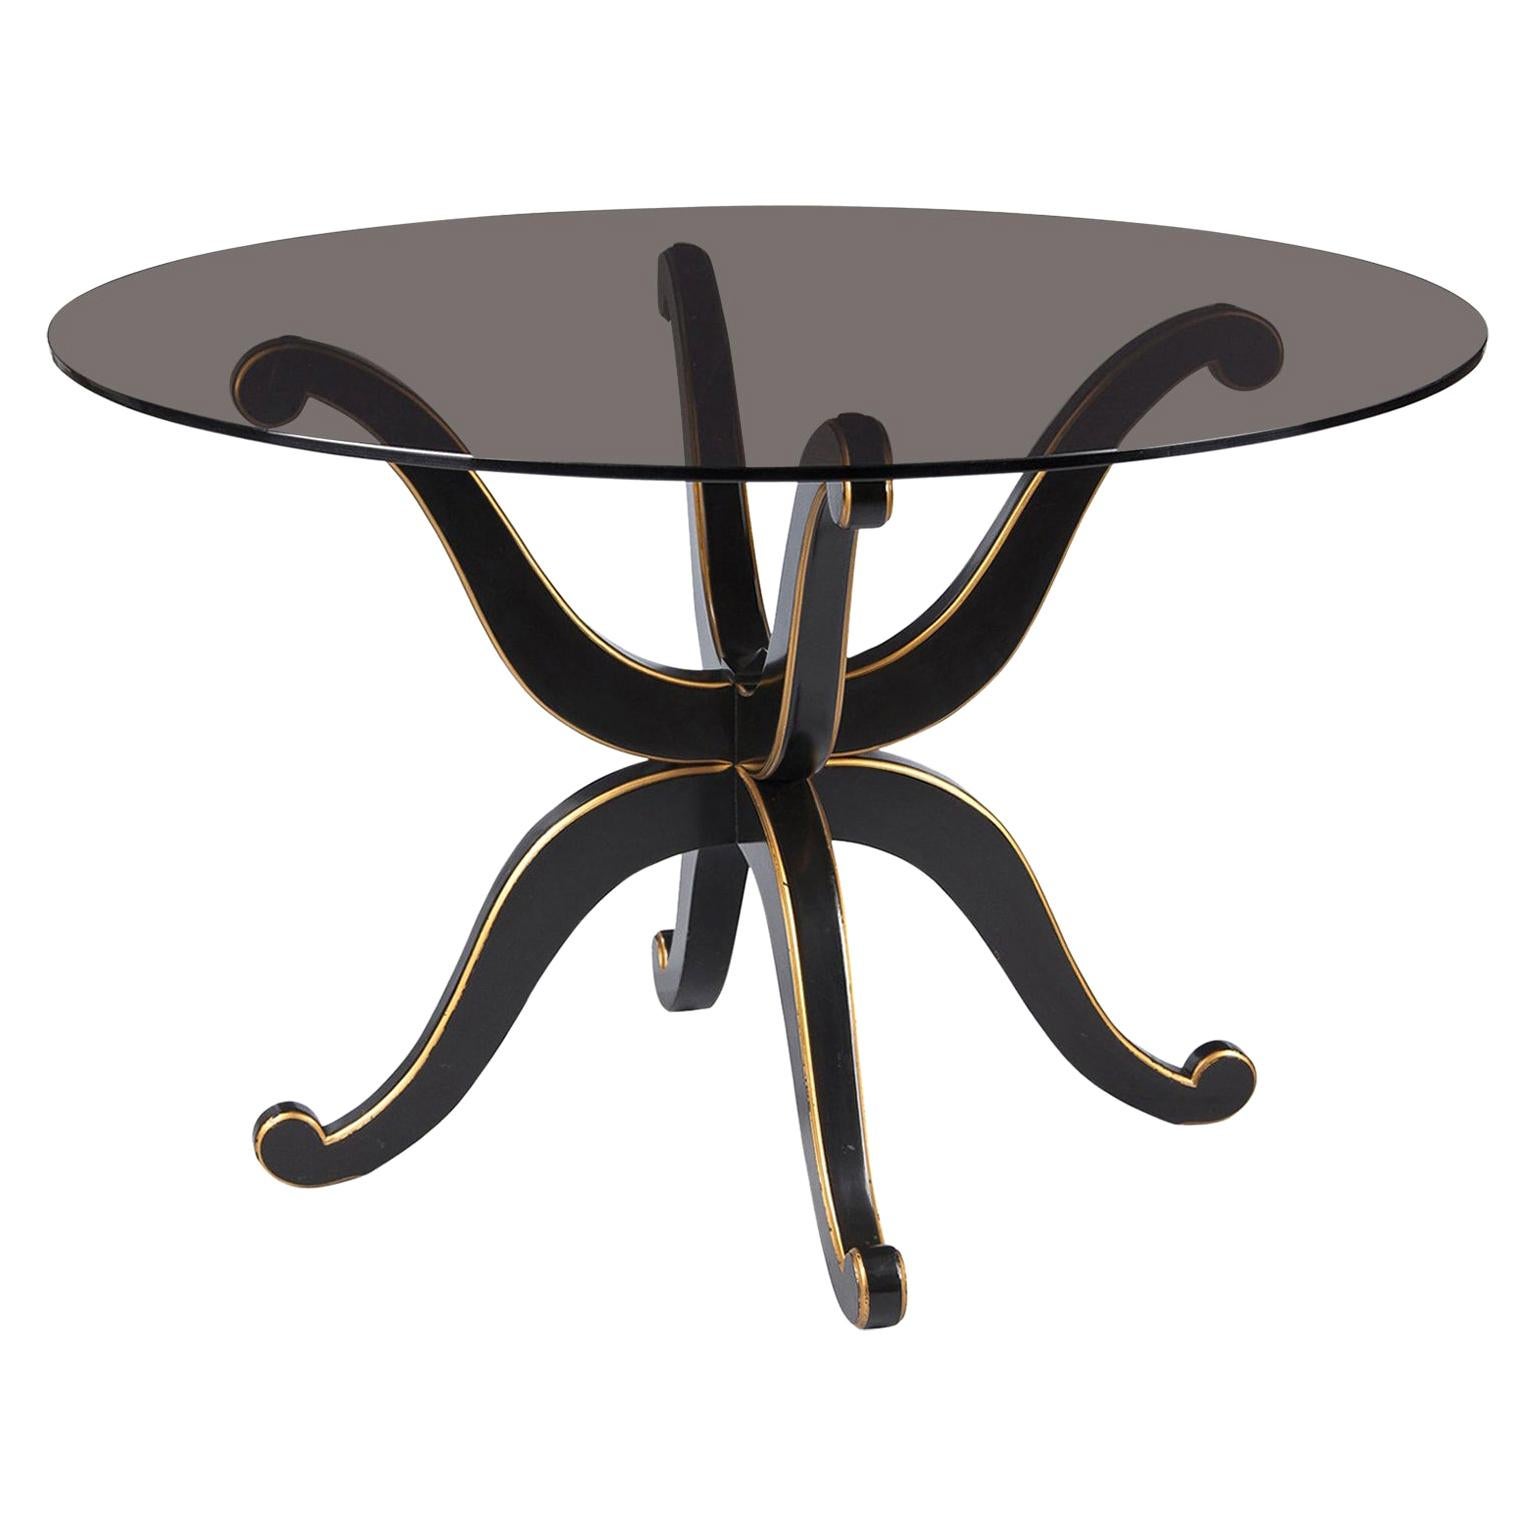 French Neoclassical Maurice Hirsch Glass Top Table with Ebonized Base, 1950s